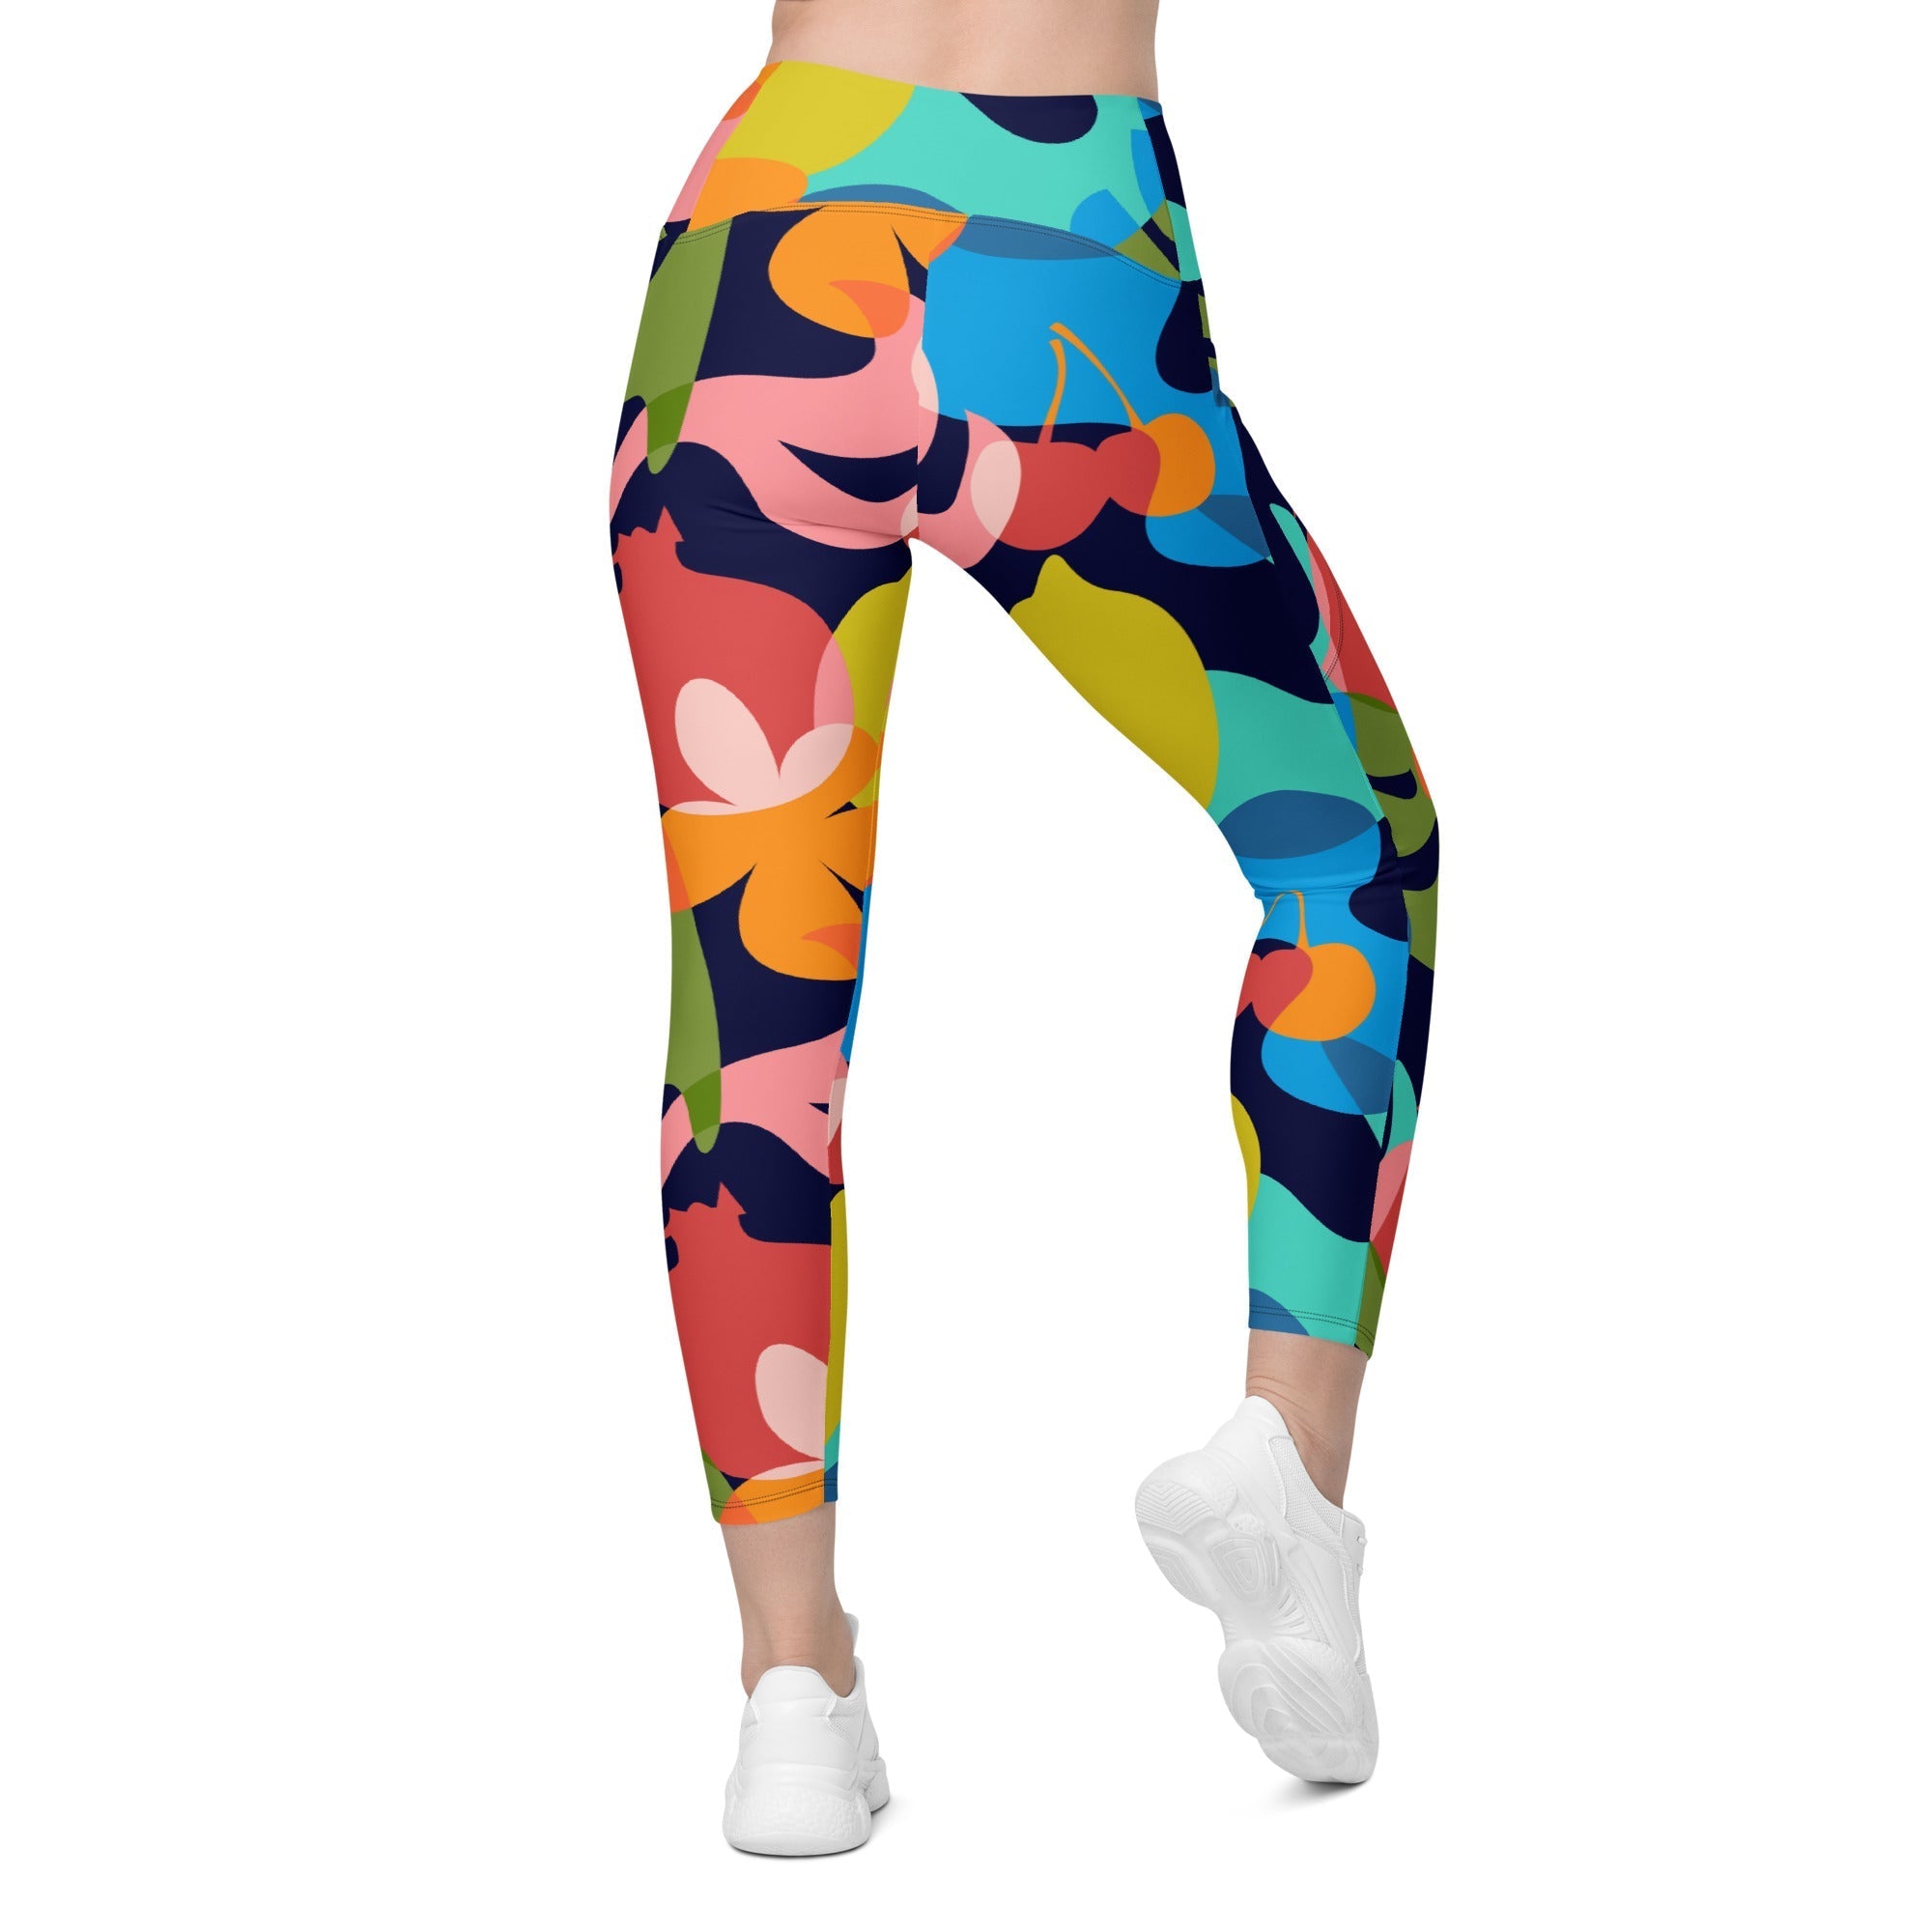 Dopamine Crossover Leggings With Pockets